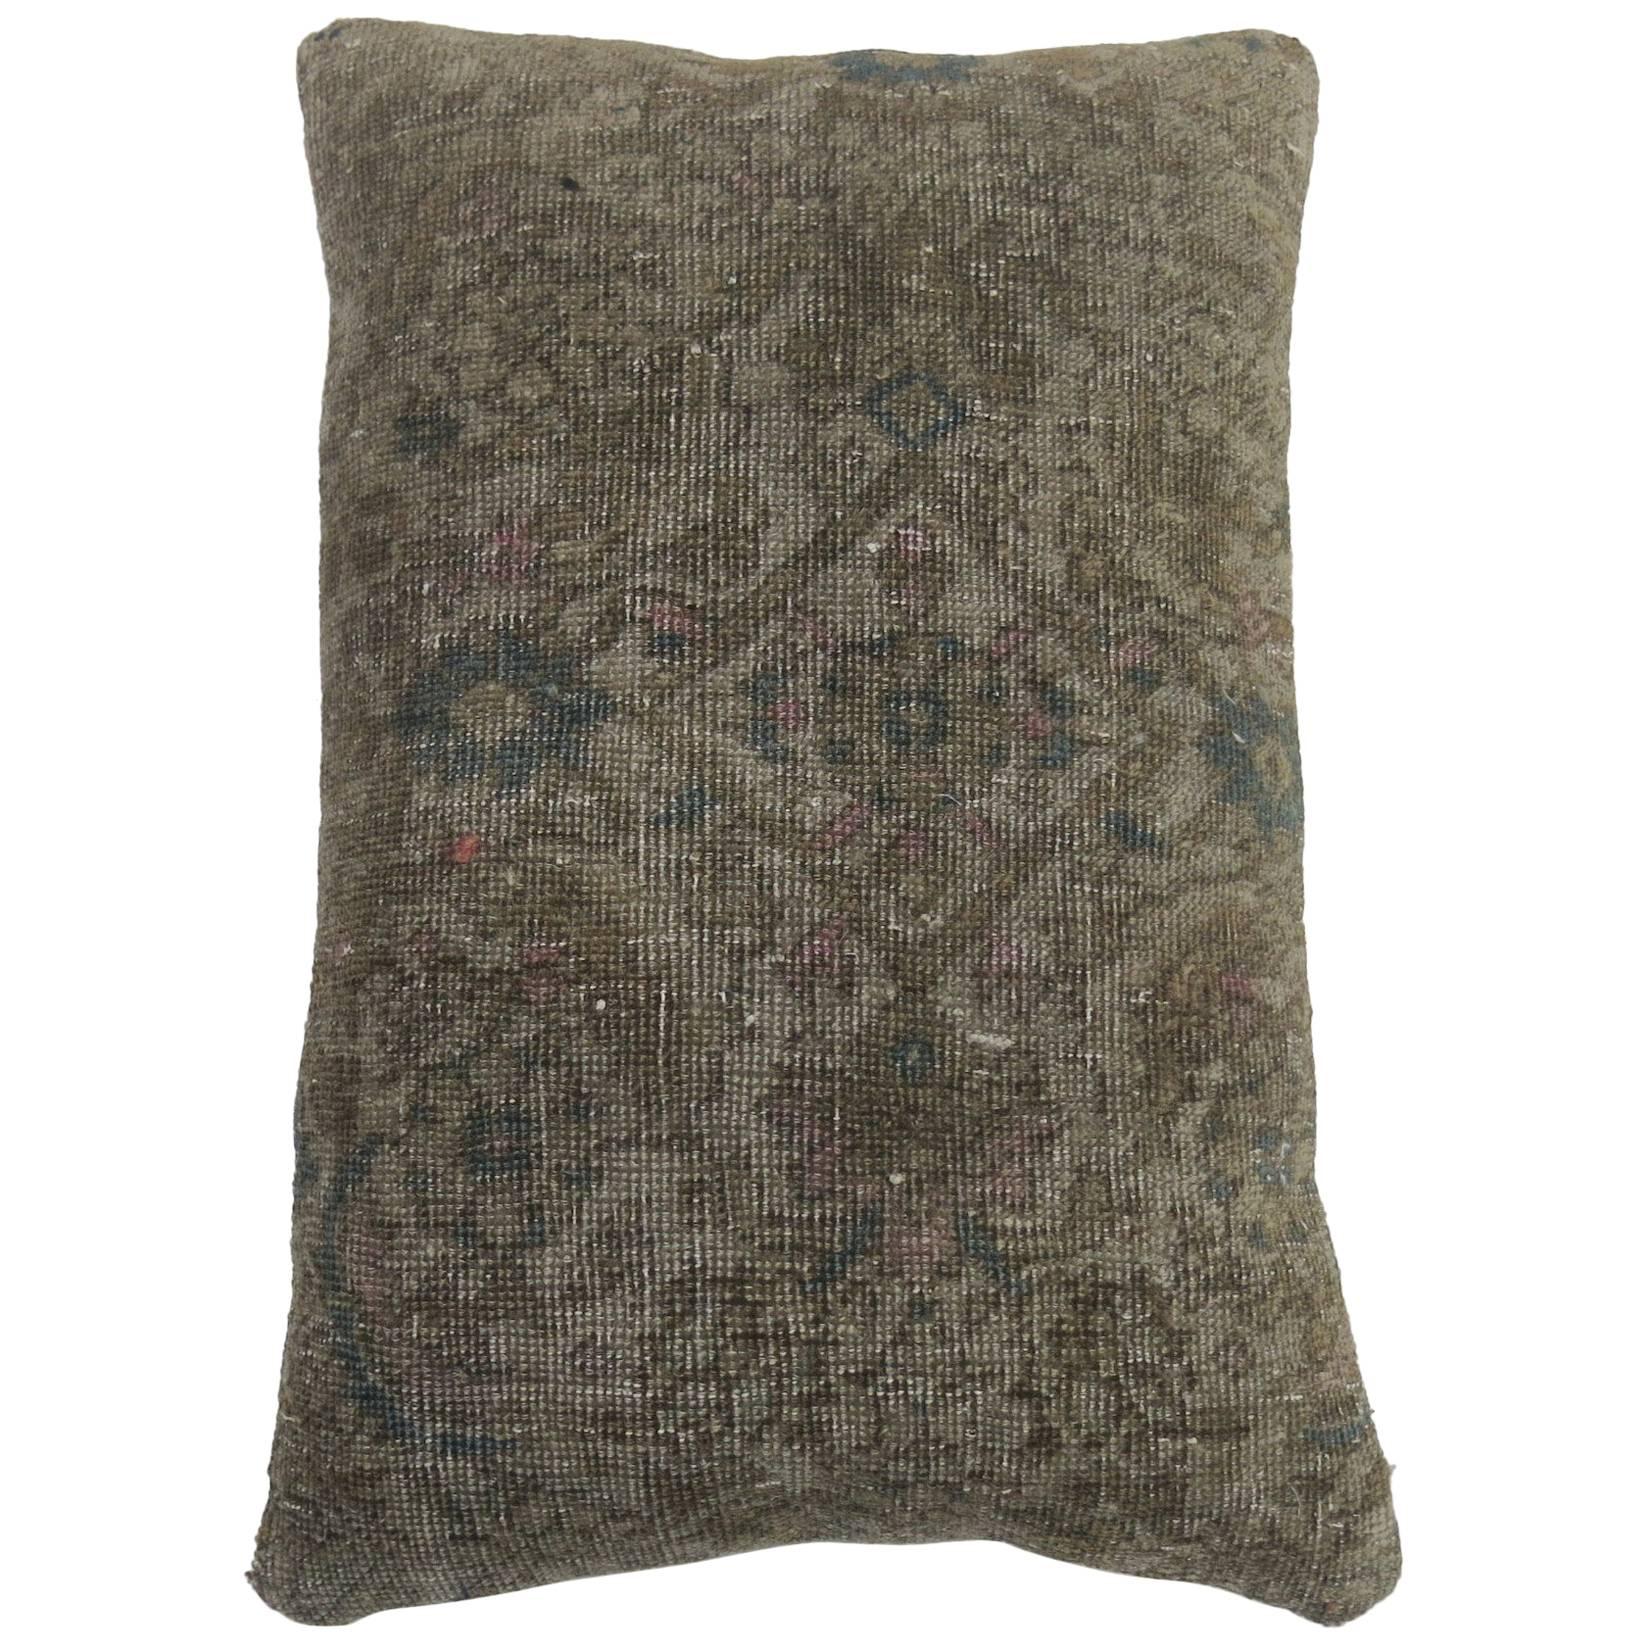 Large Vintage Persian Shabby Chic Rug Pillow